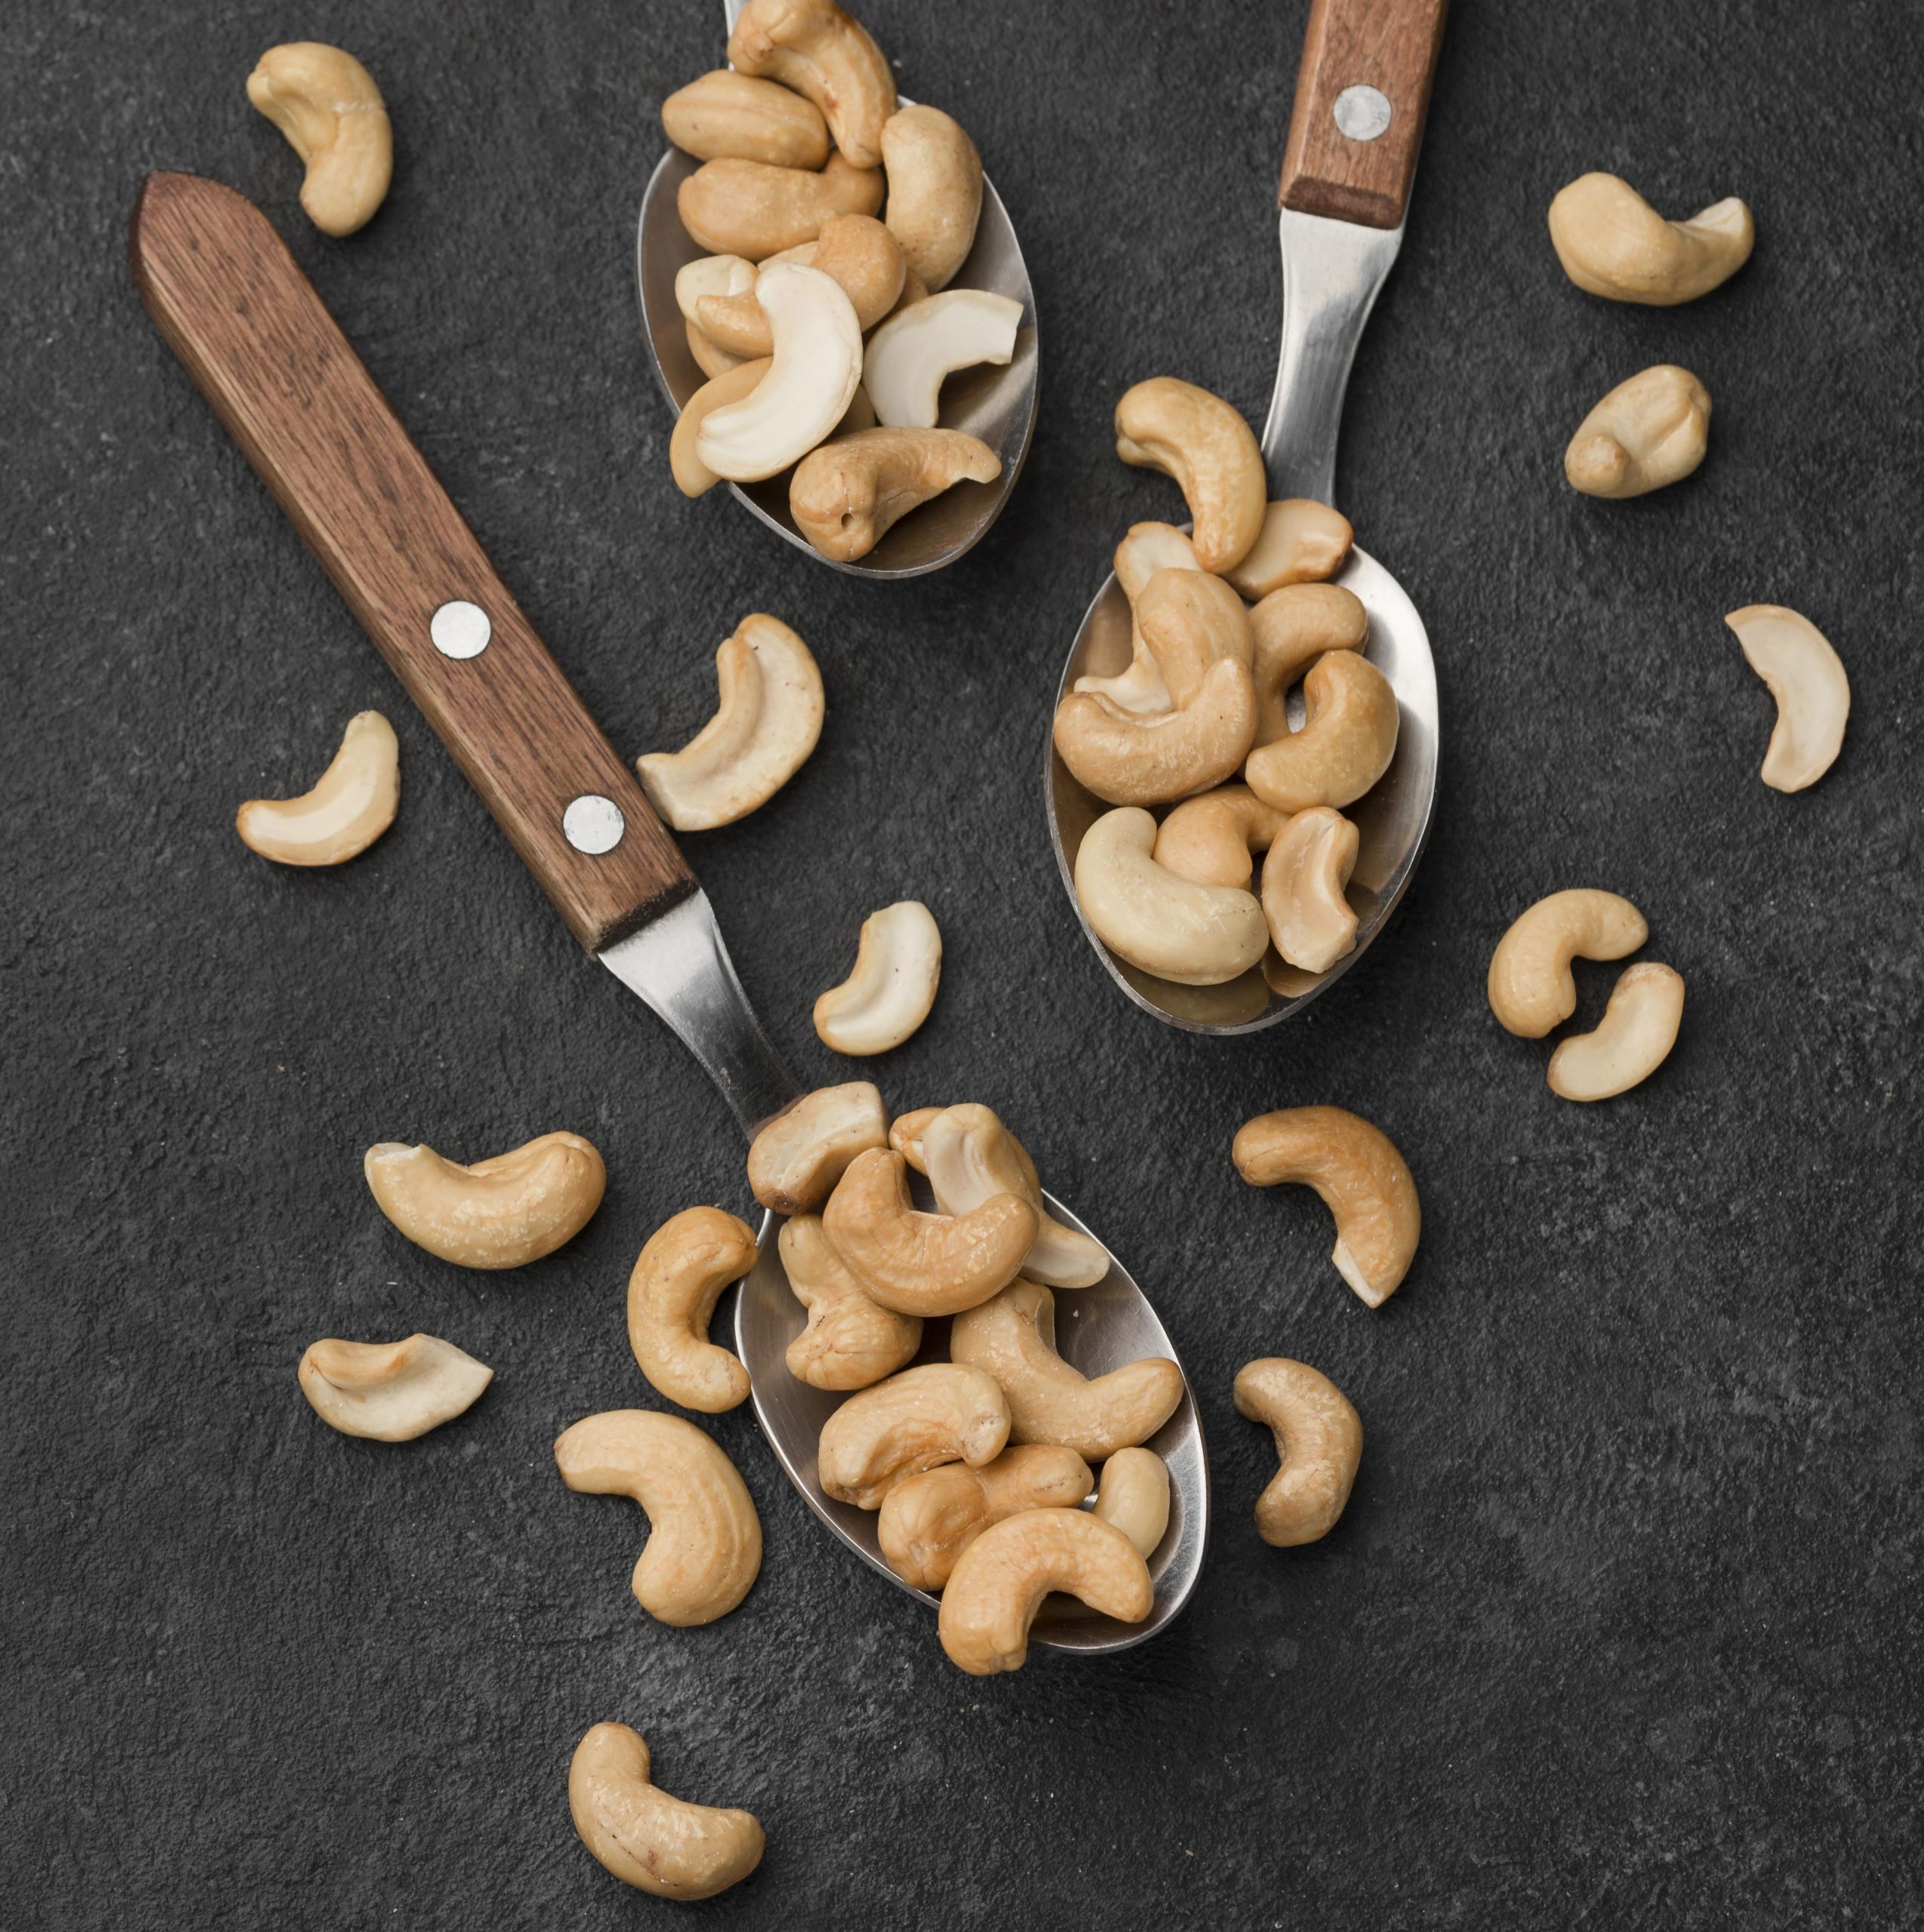 Innovative Organic Cashew Nut Products at Home: Explore the Versatility